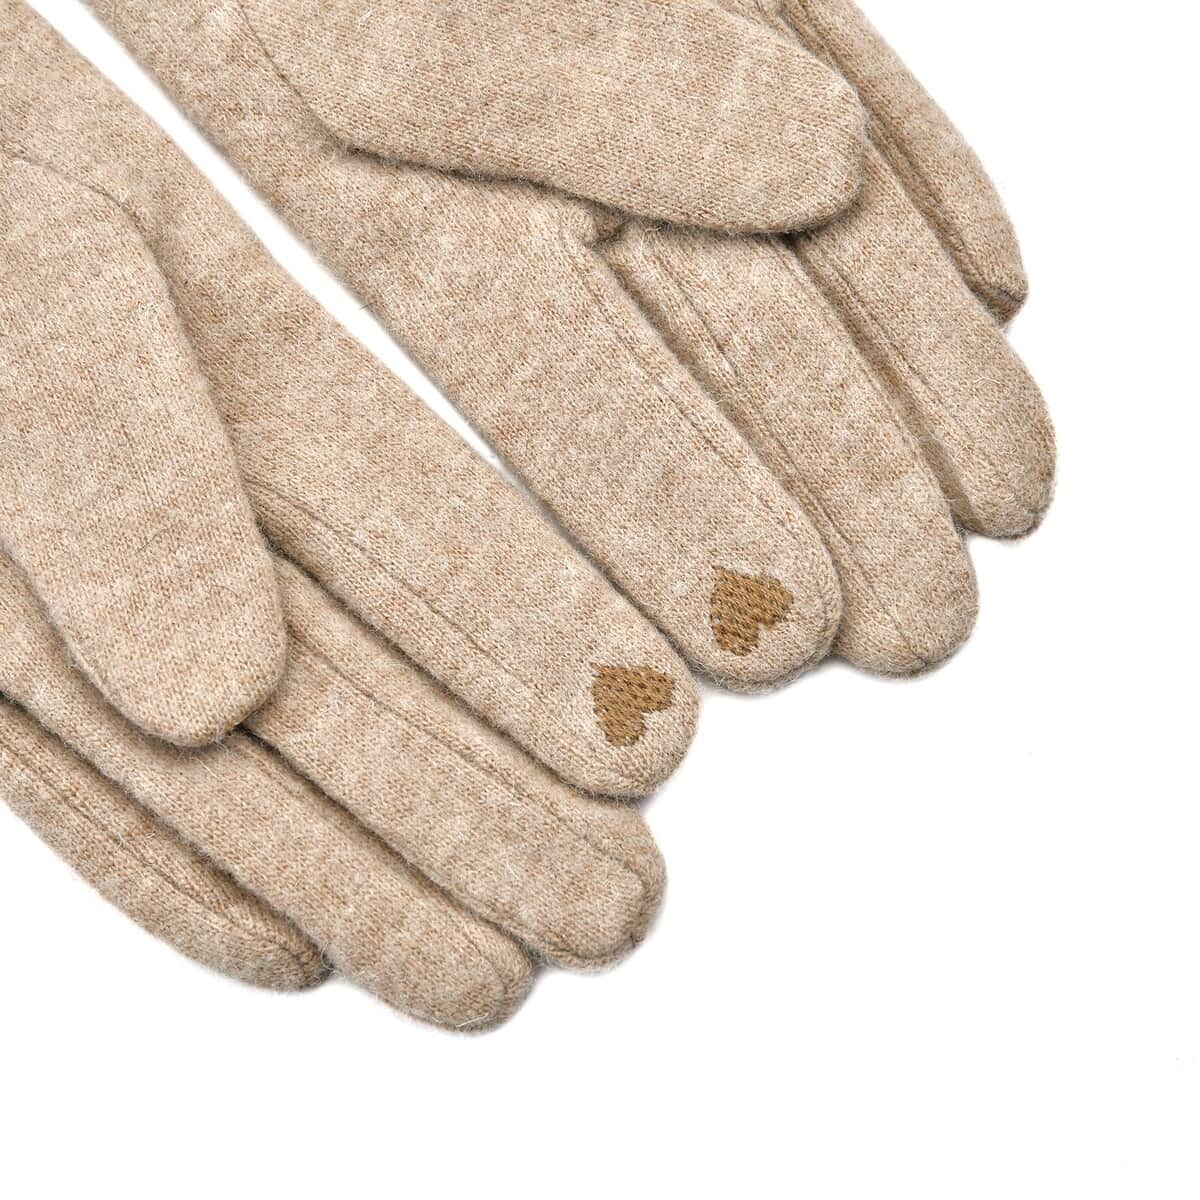 Beige Cashmere Warm Gloves with Bowknot and Equipped Touch Screen Friendly (9.2"x3.54") image number 3